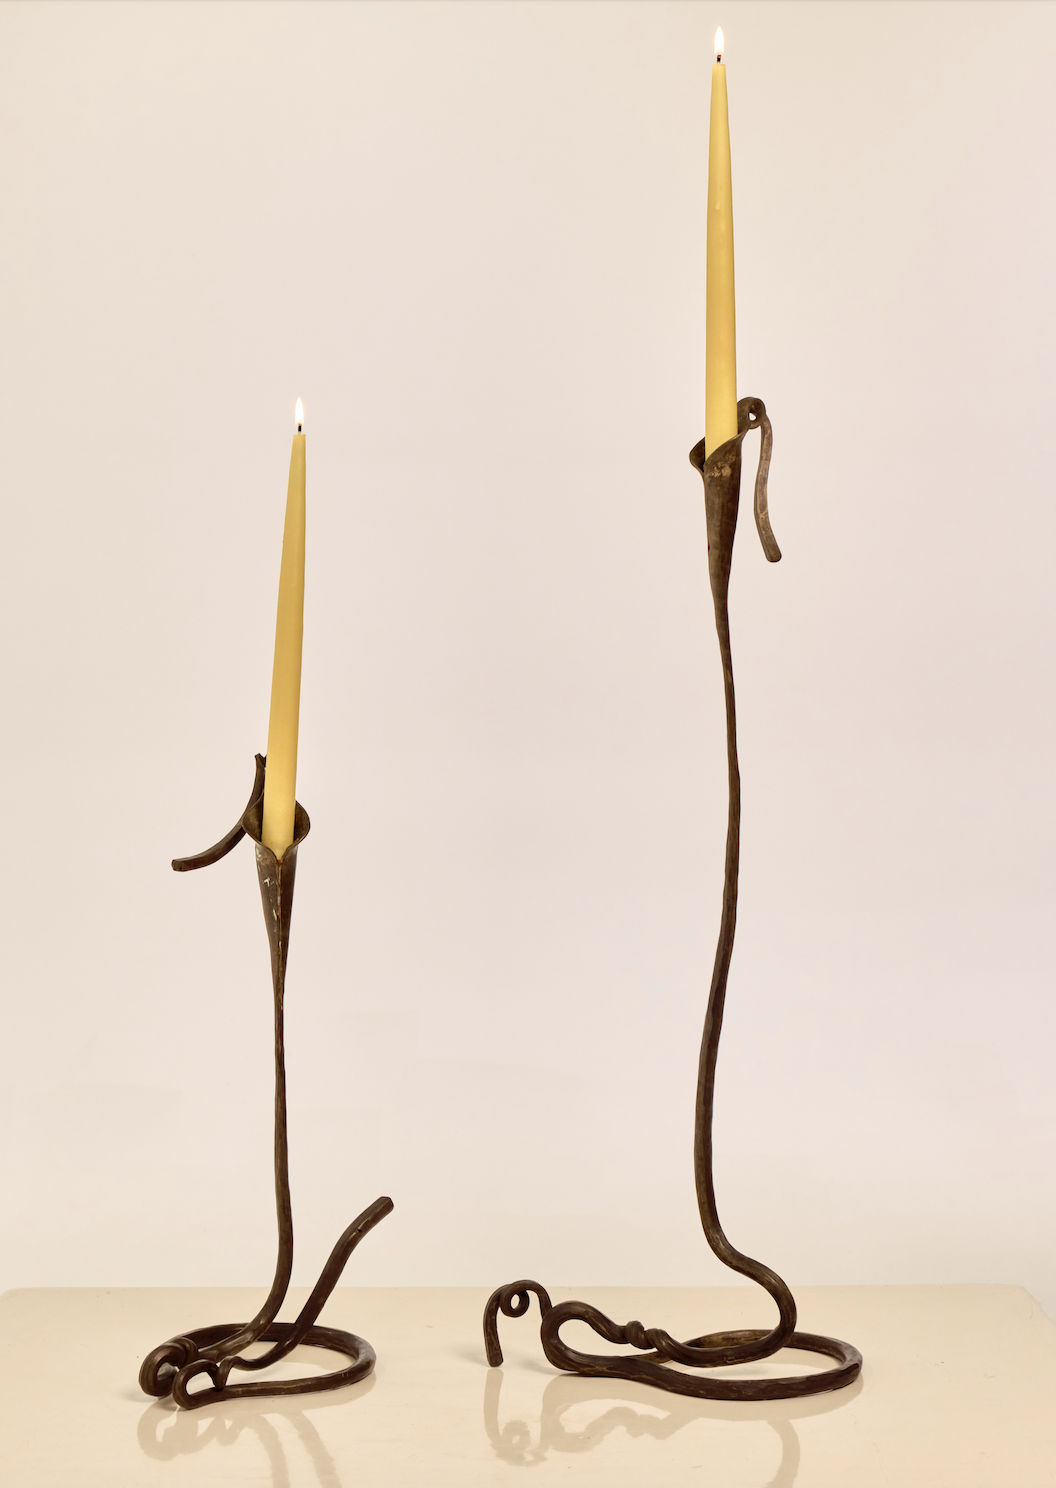 Pair of Large Calla Lily Shaped Candle holders by Jack Brubaker